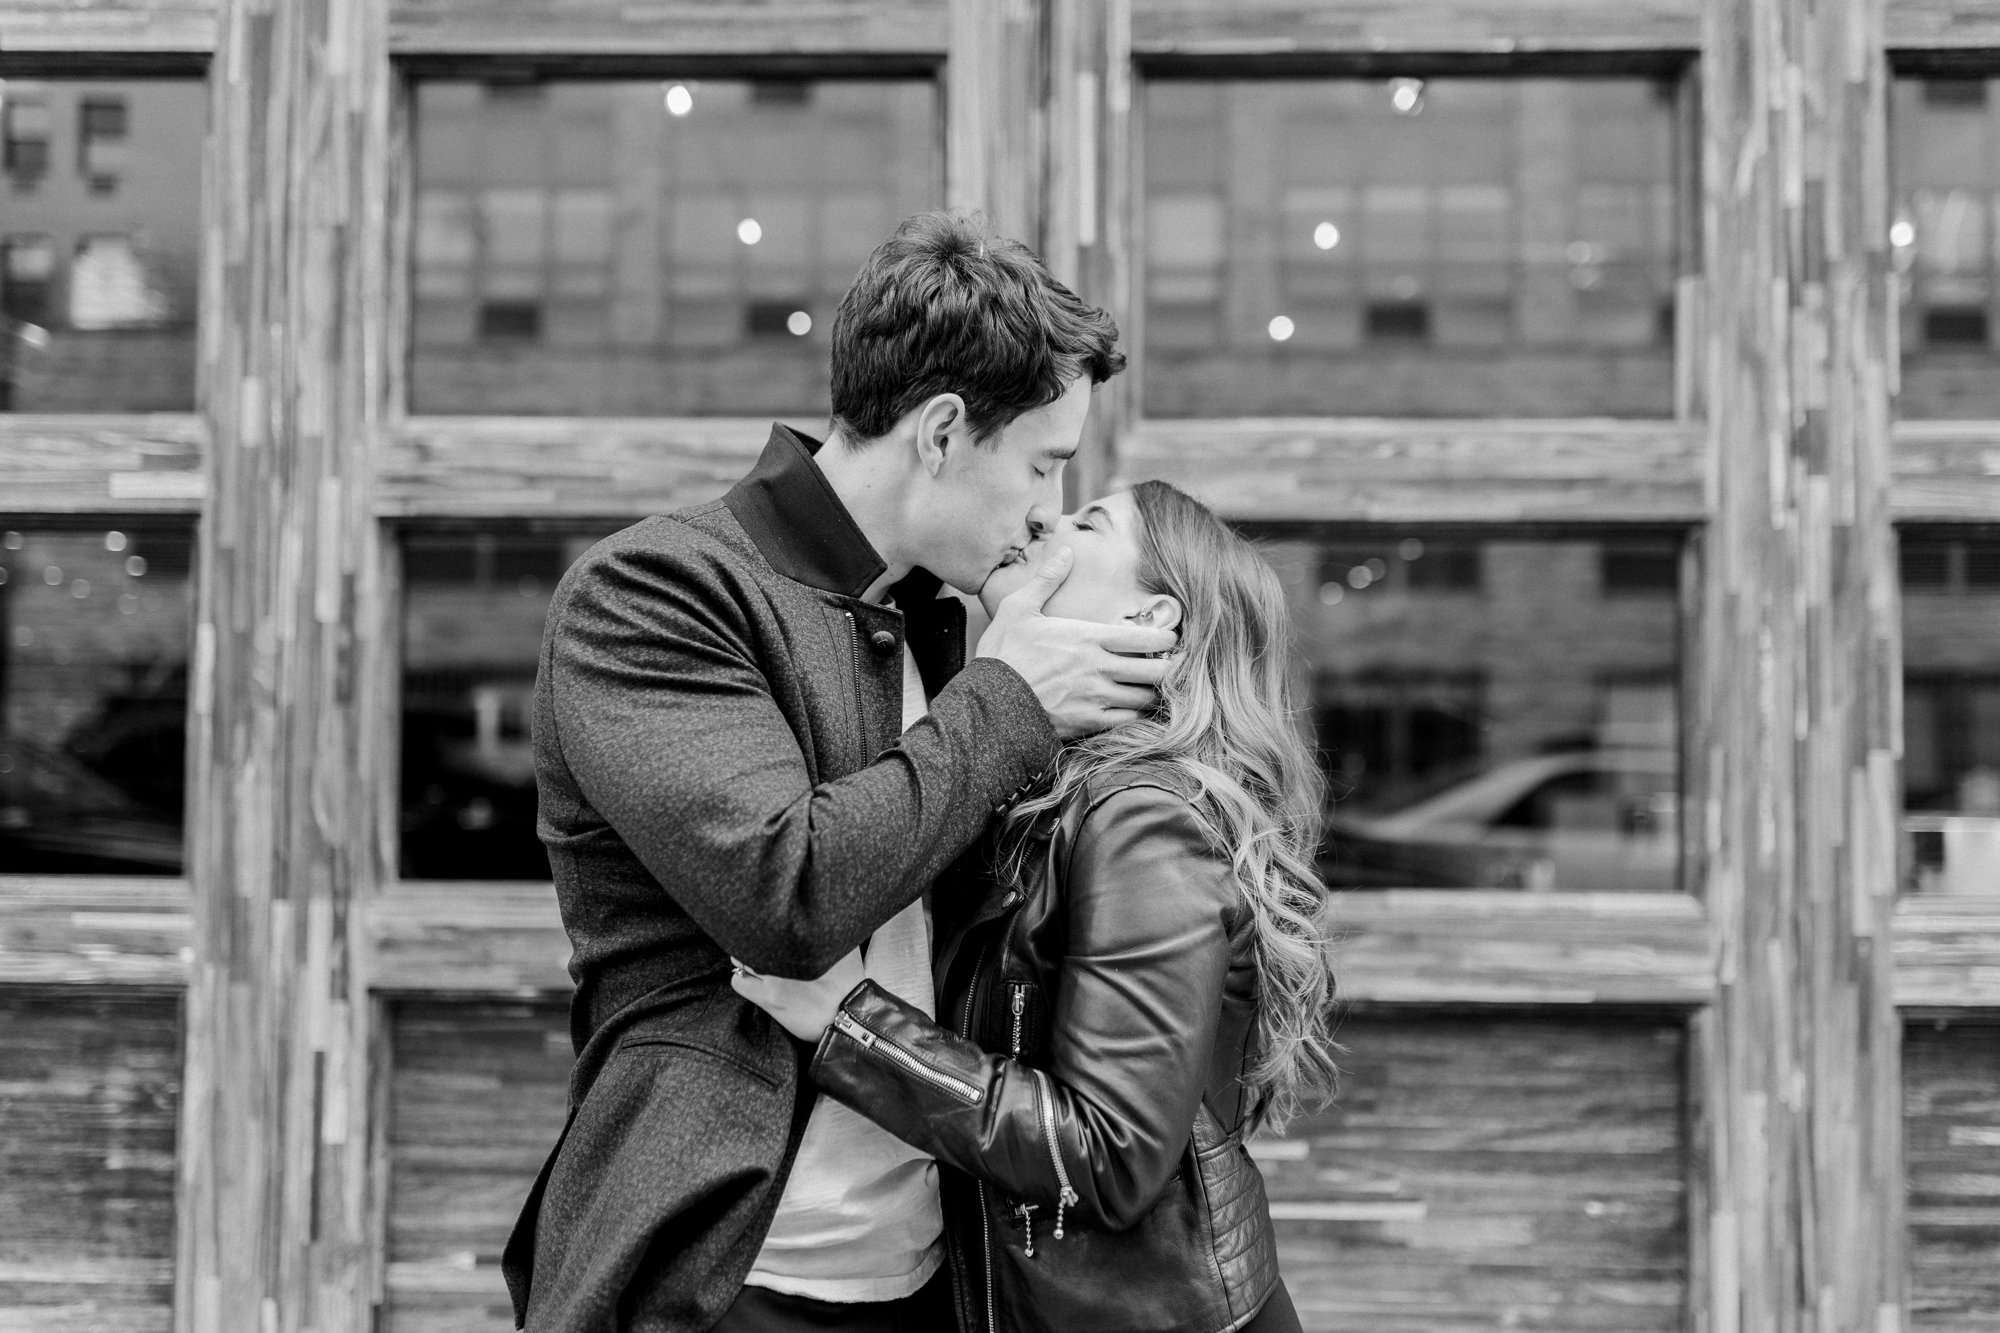 Dazzling West Village Engagement Photos with Spring Blossoms